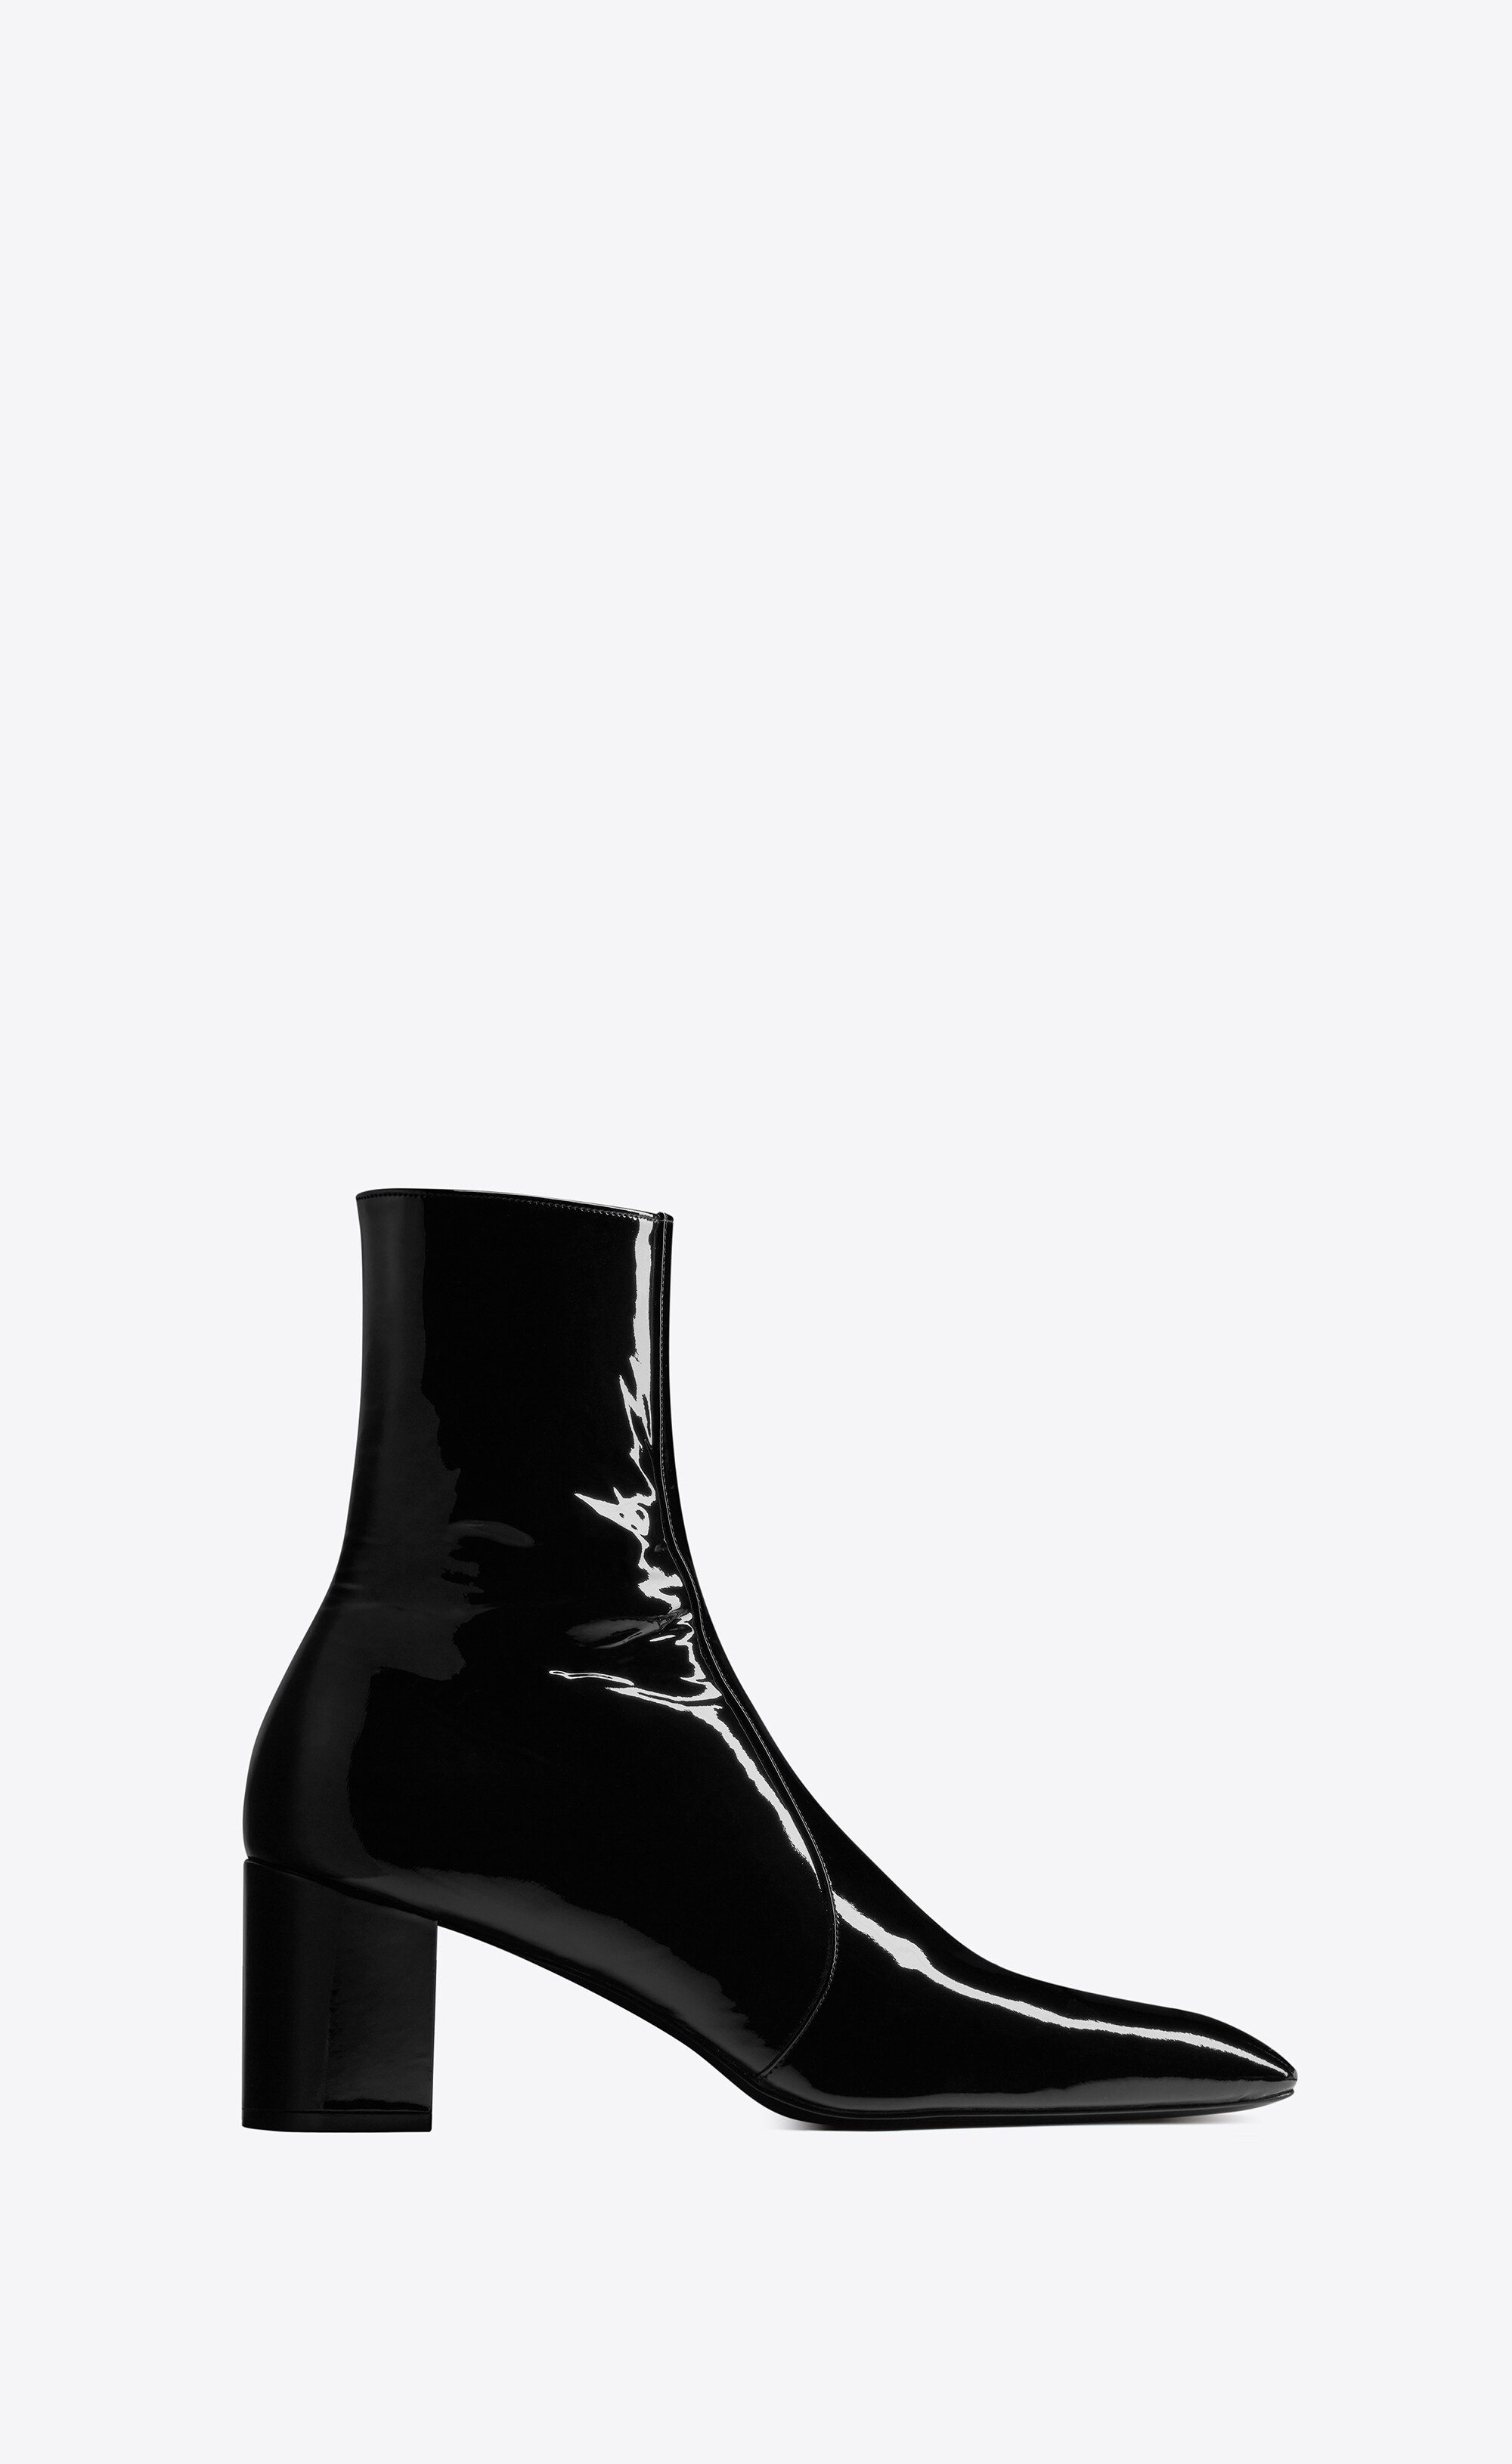 xiv zipped boots in patent leather - 1